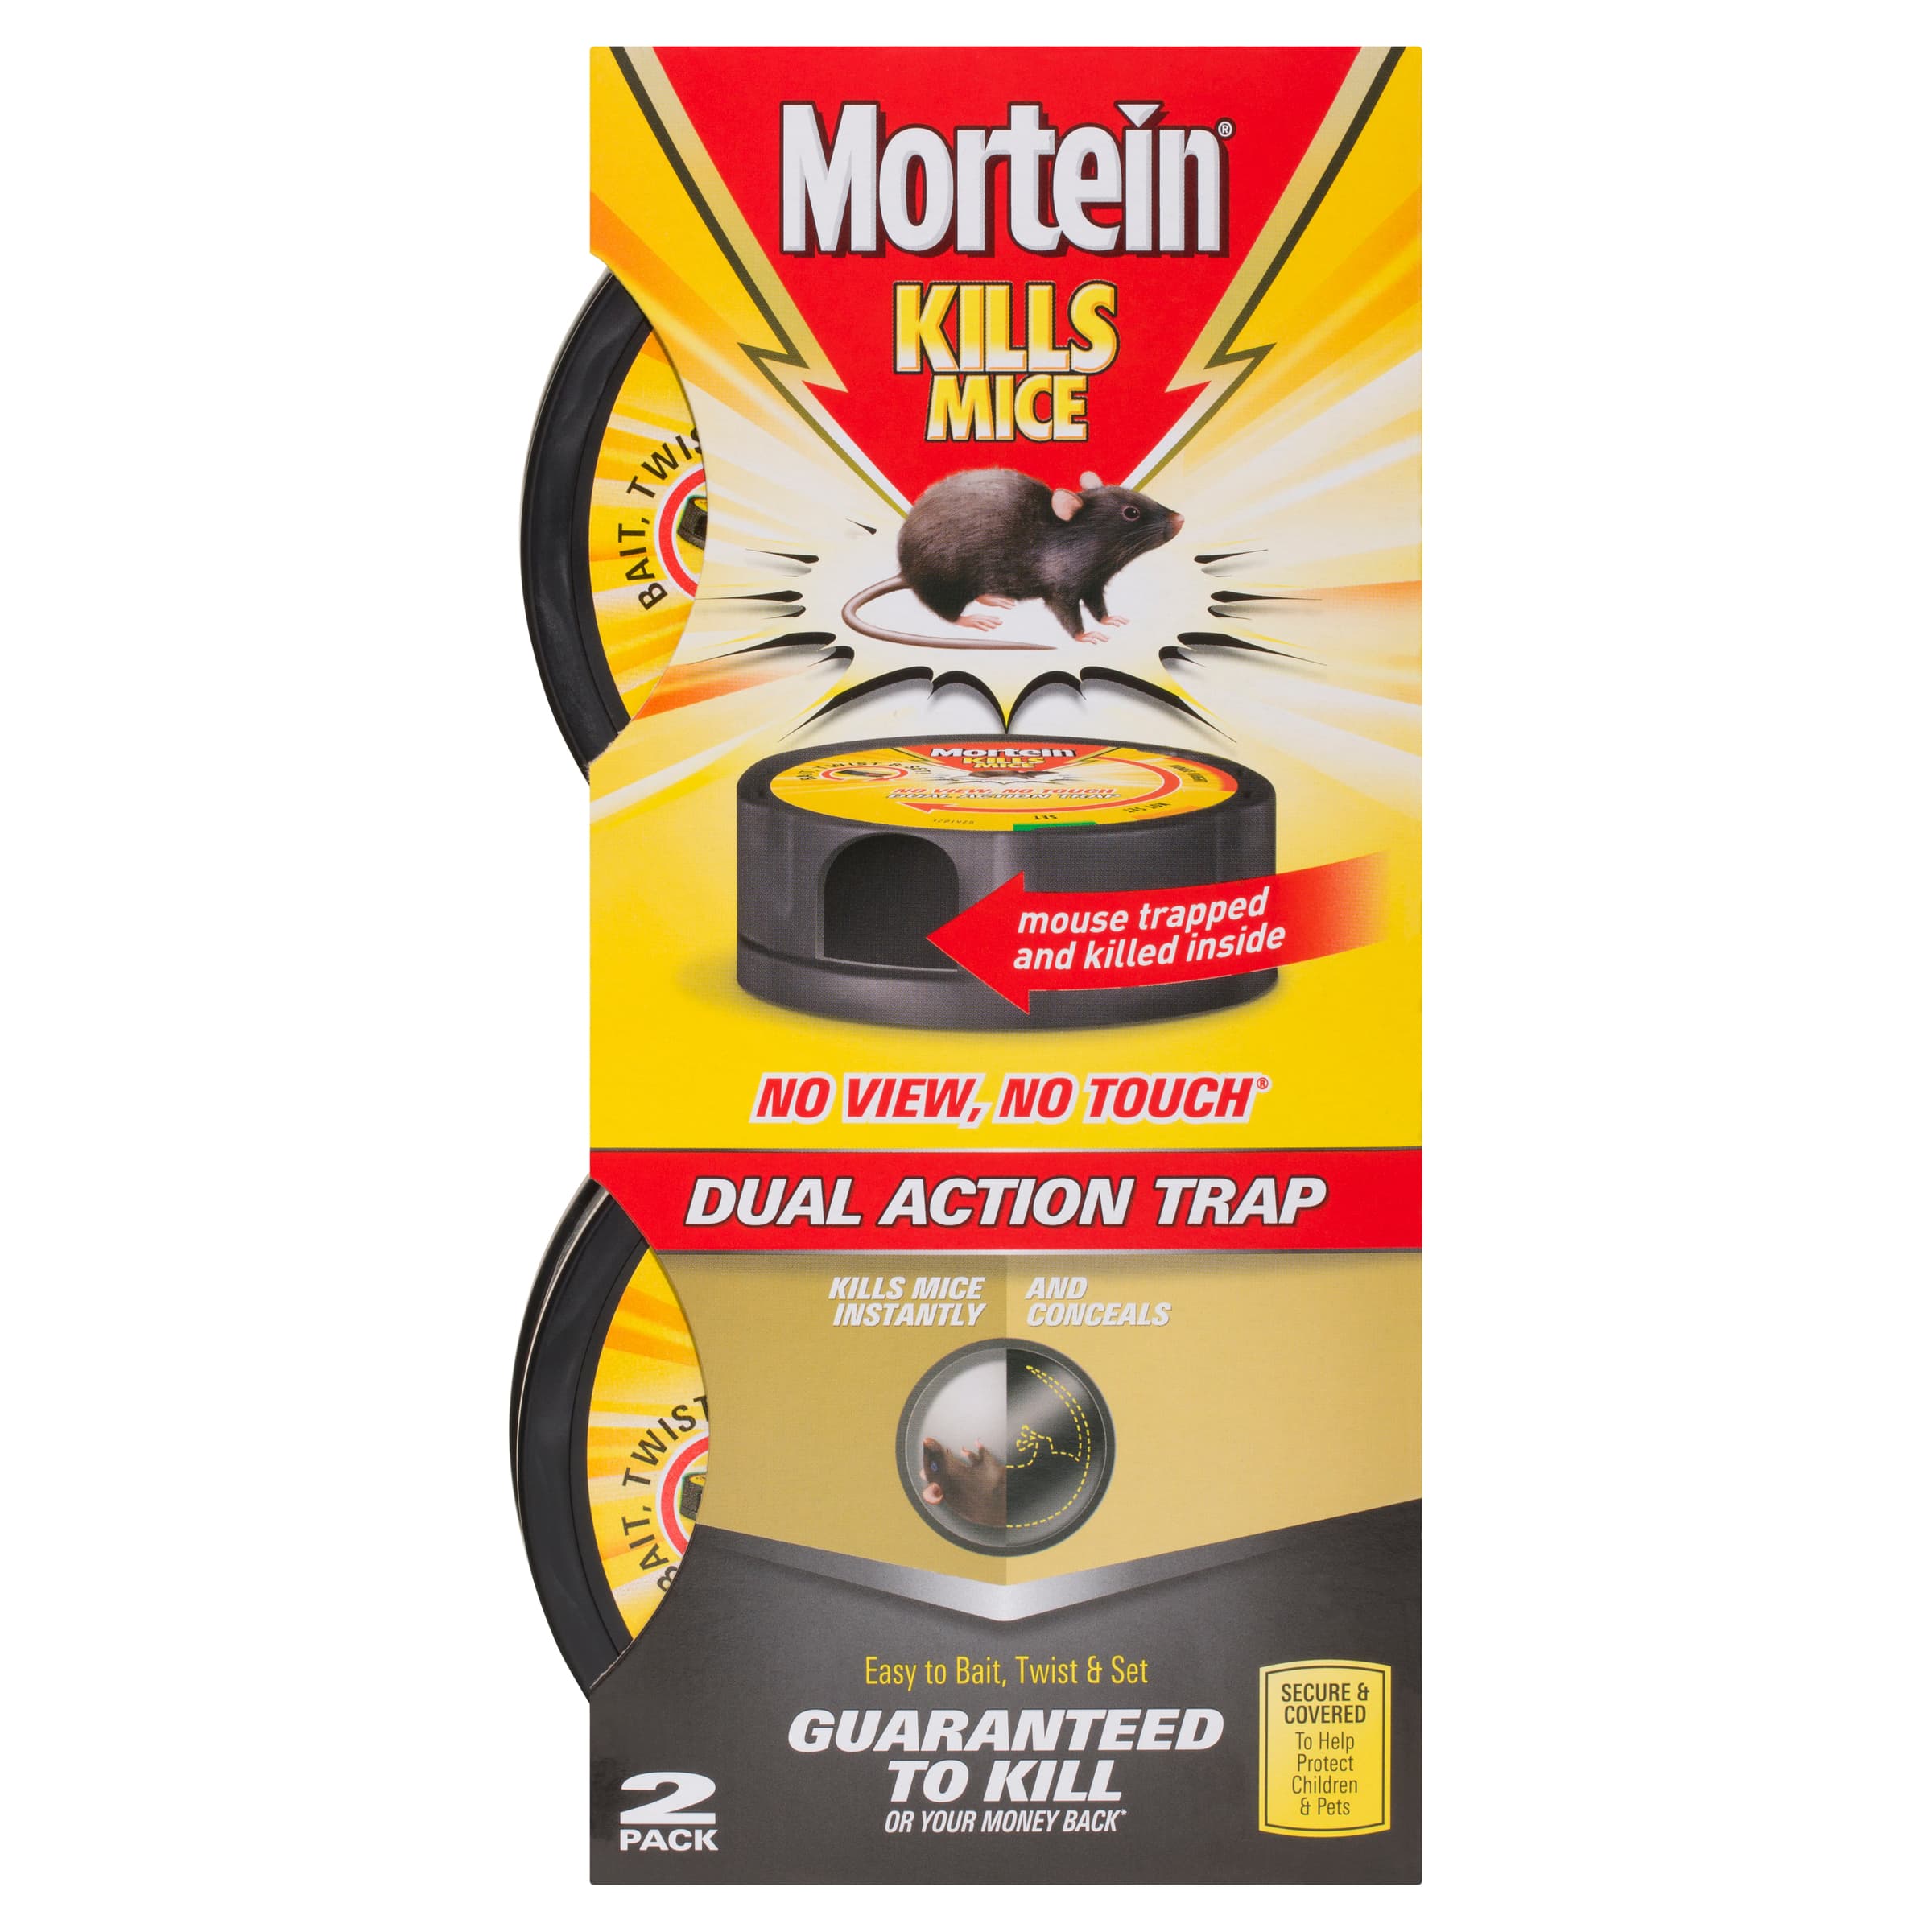 https://www.mortein.com.au/media/products/Mortein-No-View-No-Touch-Dual-Action-Mouse-Trap-2-Pack.jpg